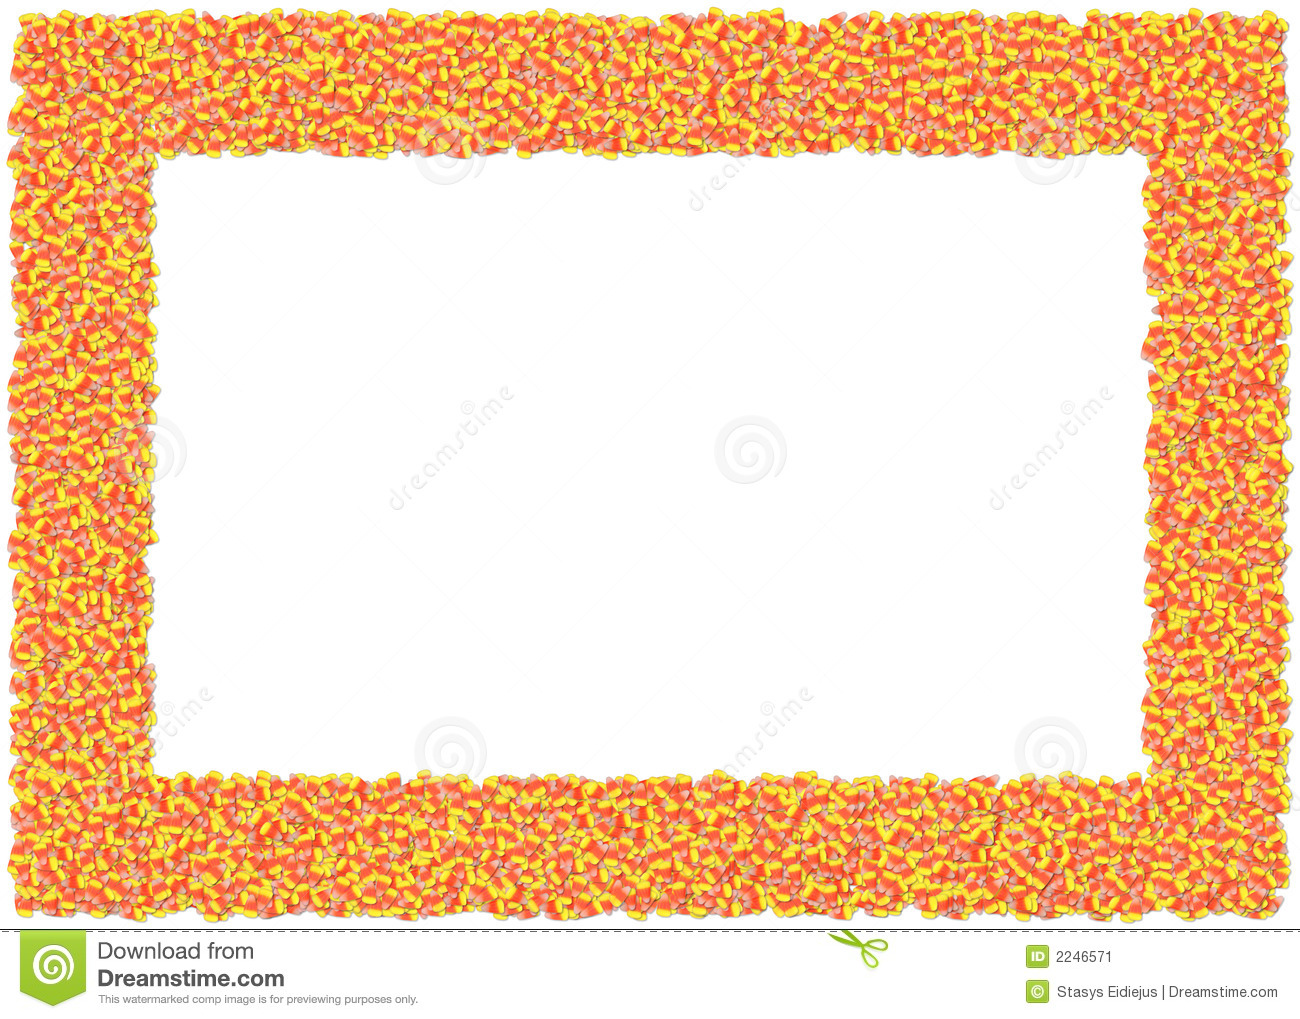 More Similar Stock Images Of   Candy Corn Frame